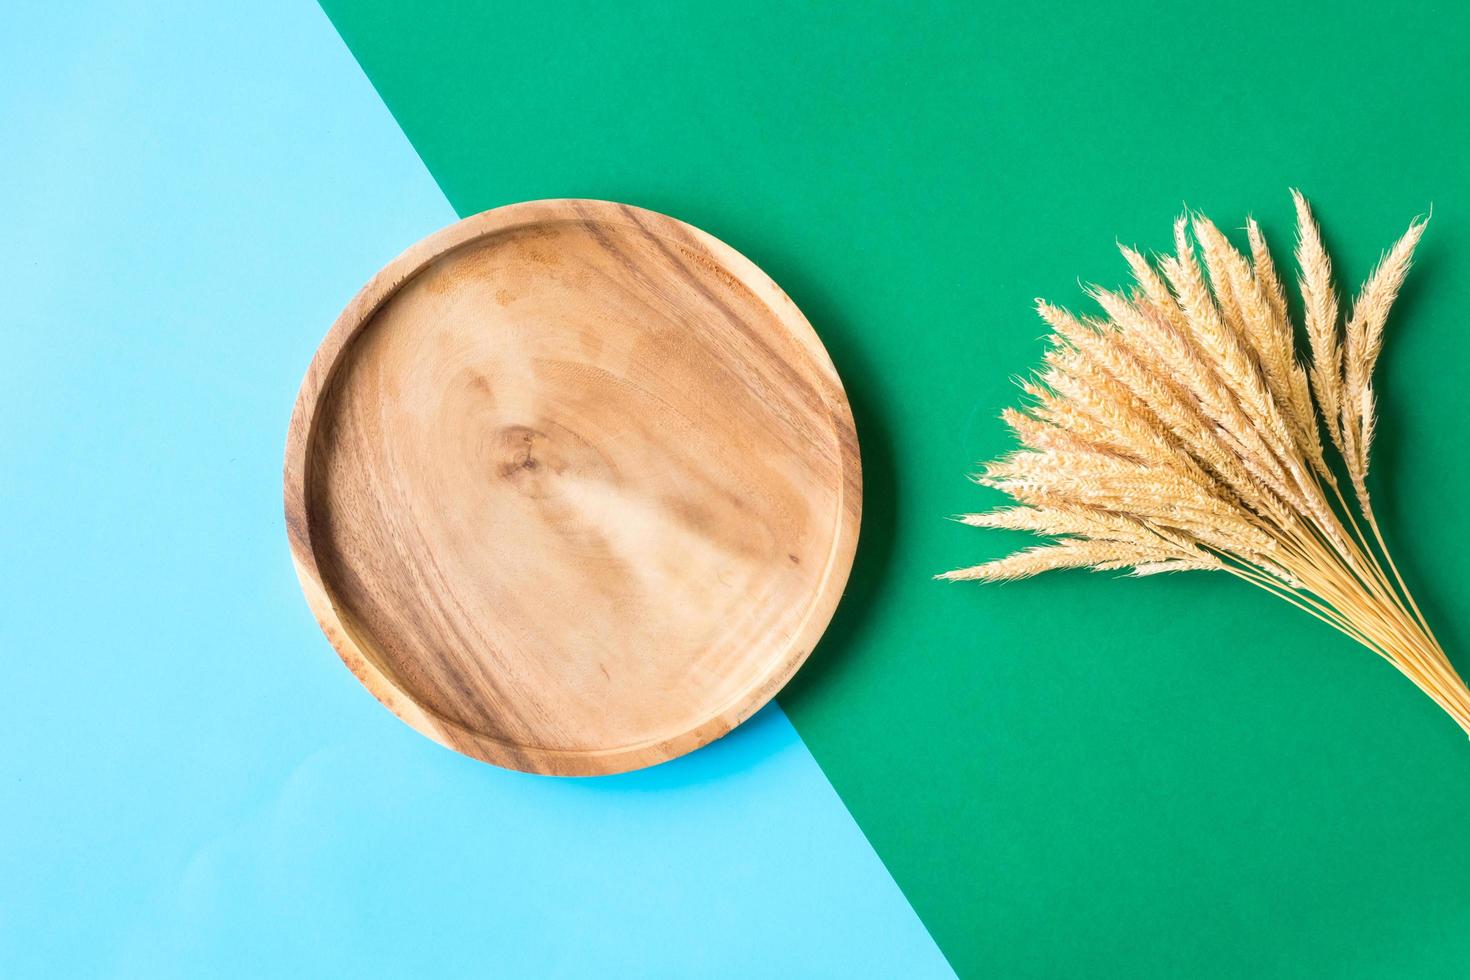 Wooden tray and paddy on colorful background. photo